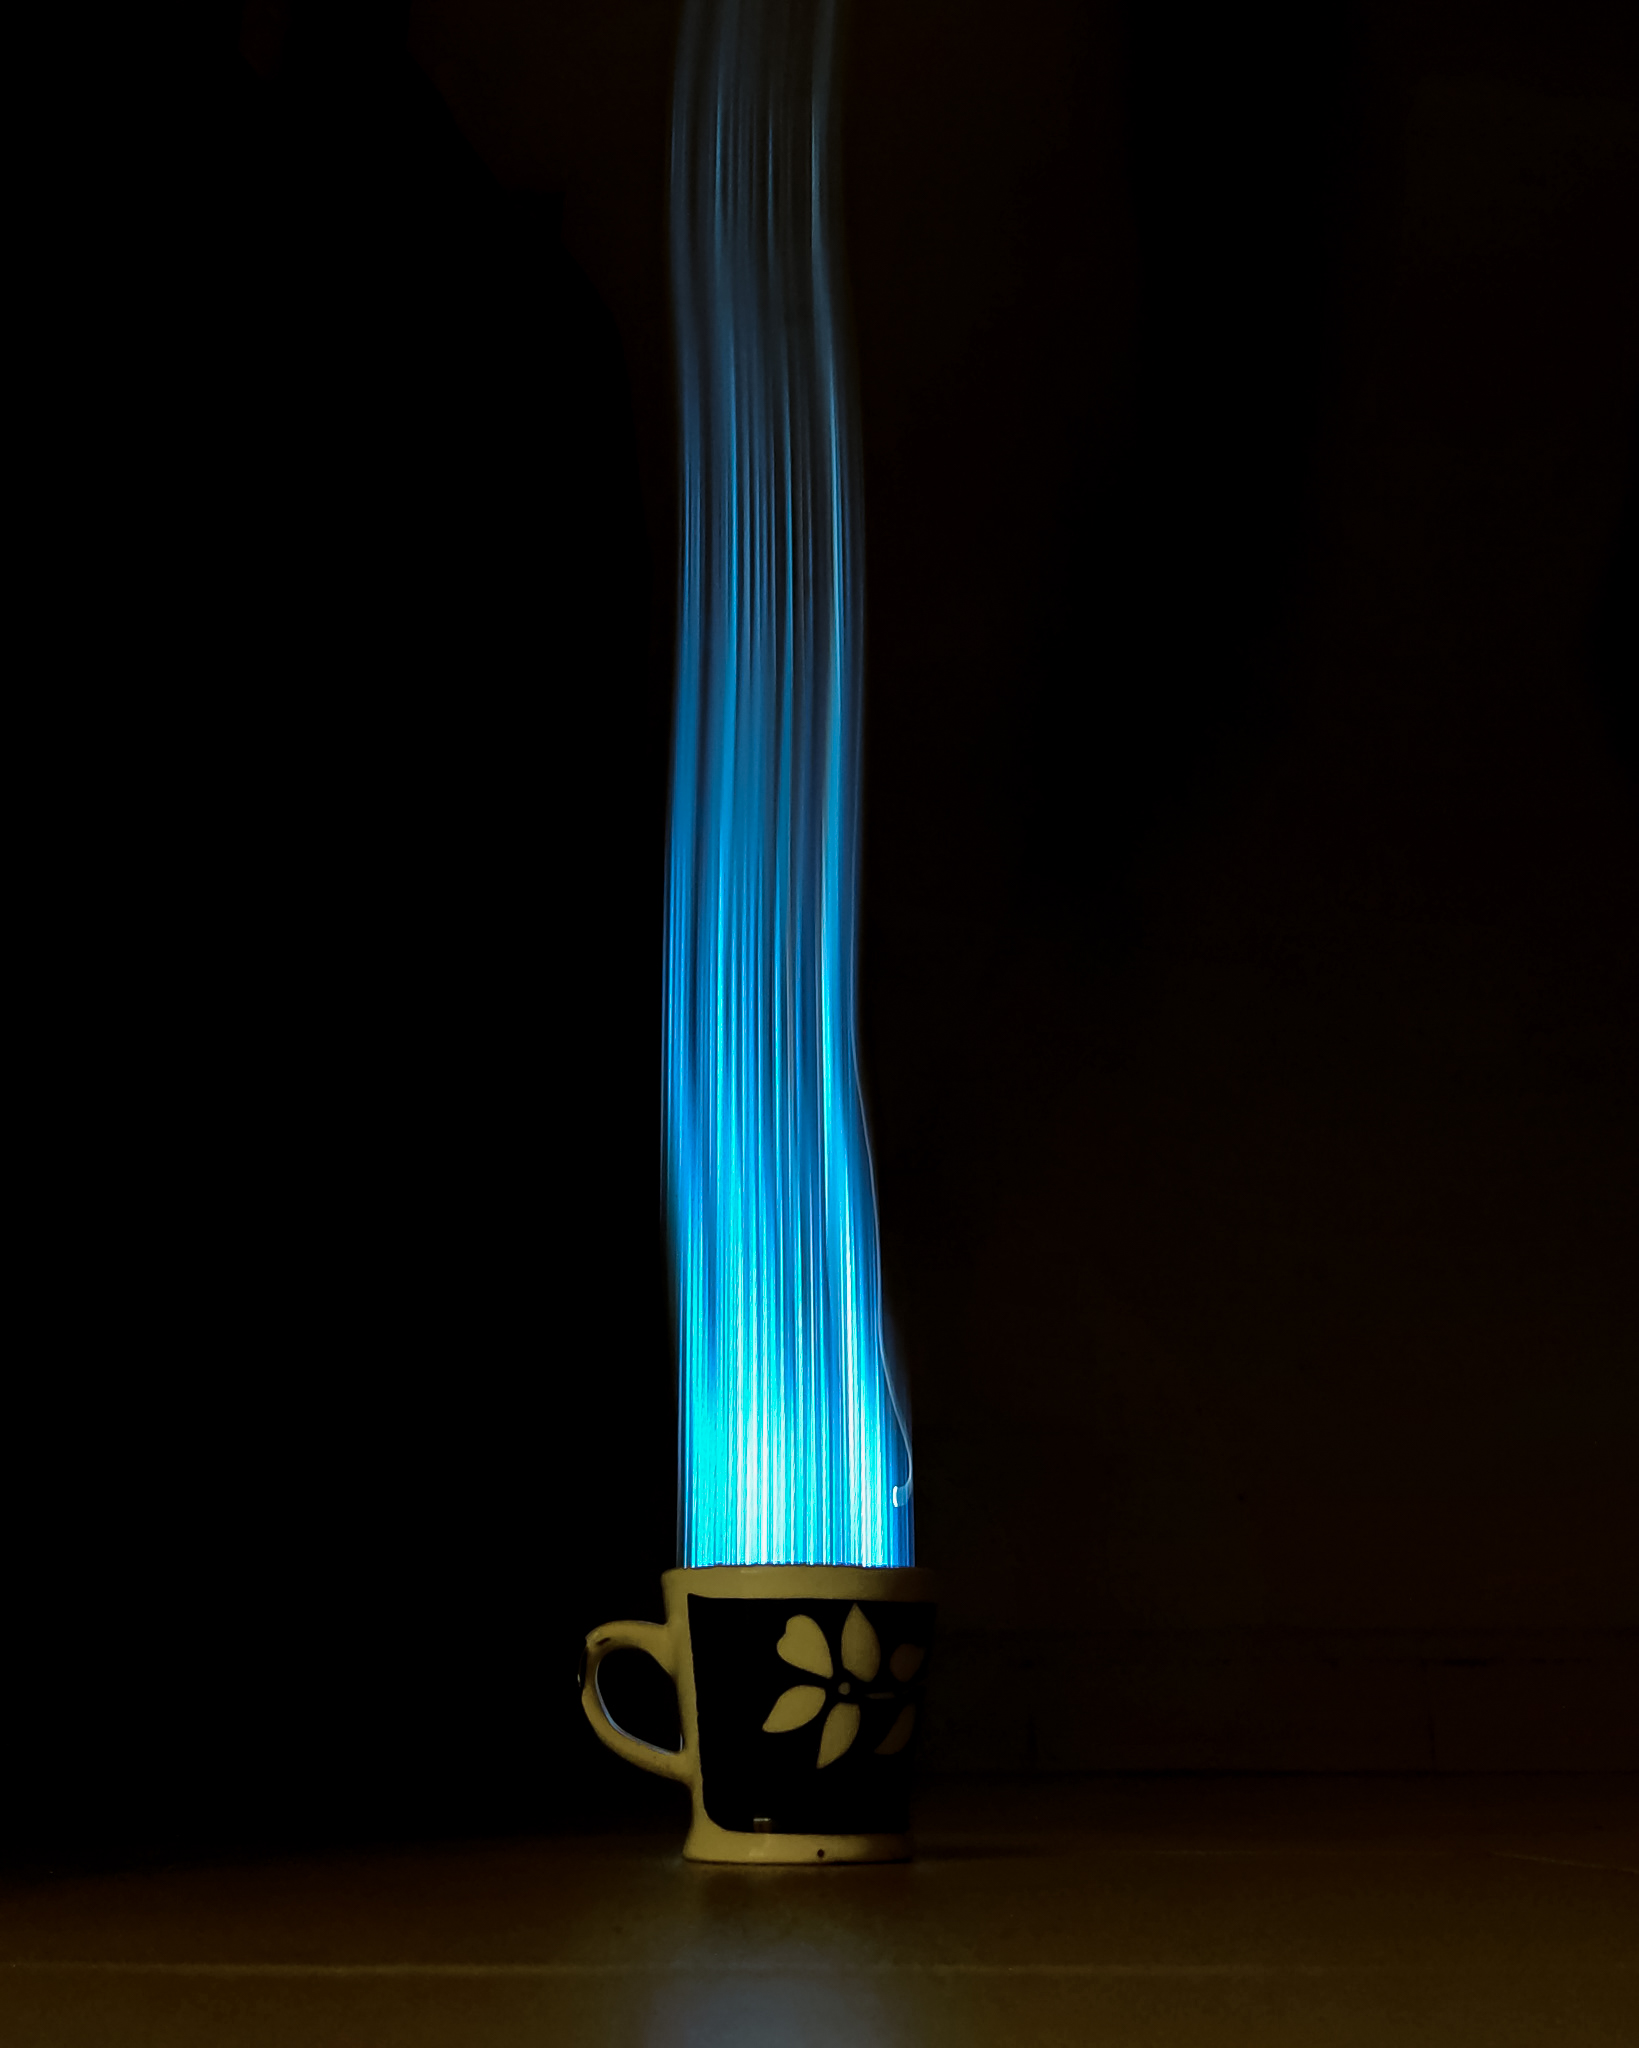 Blue lights beaming from a cup